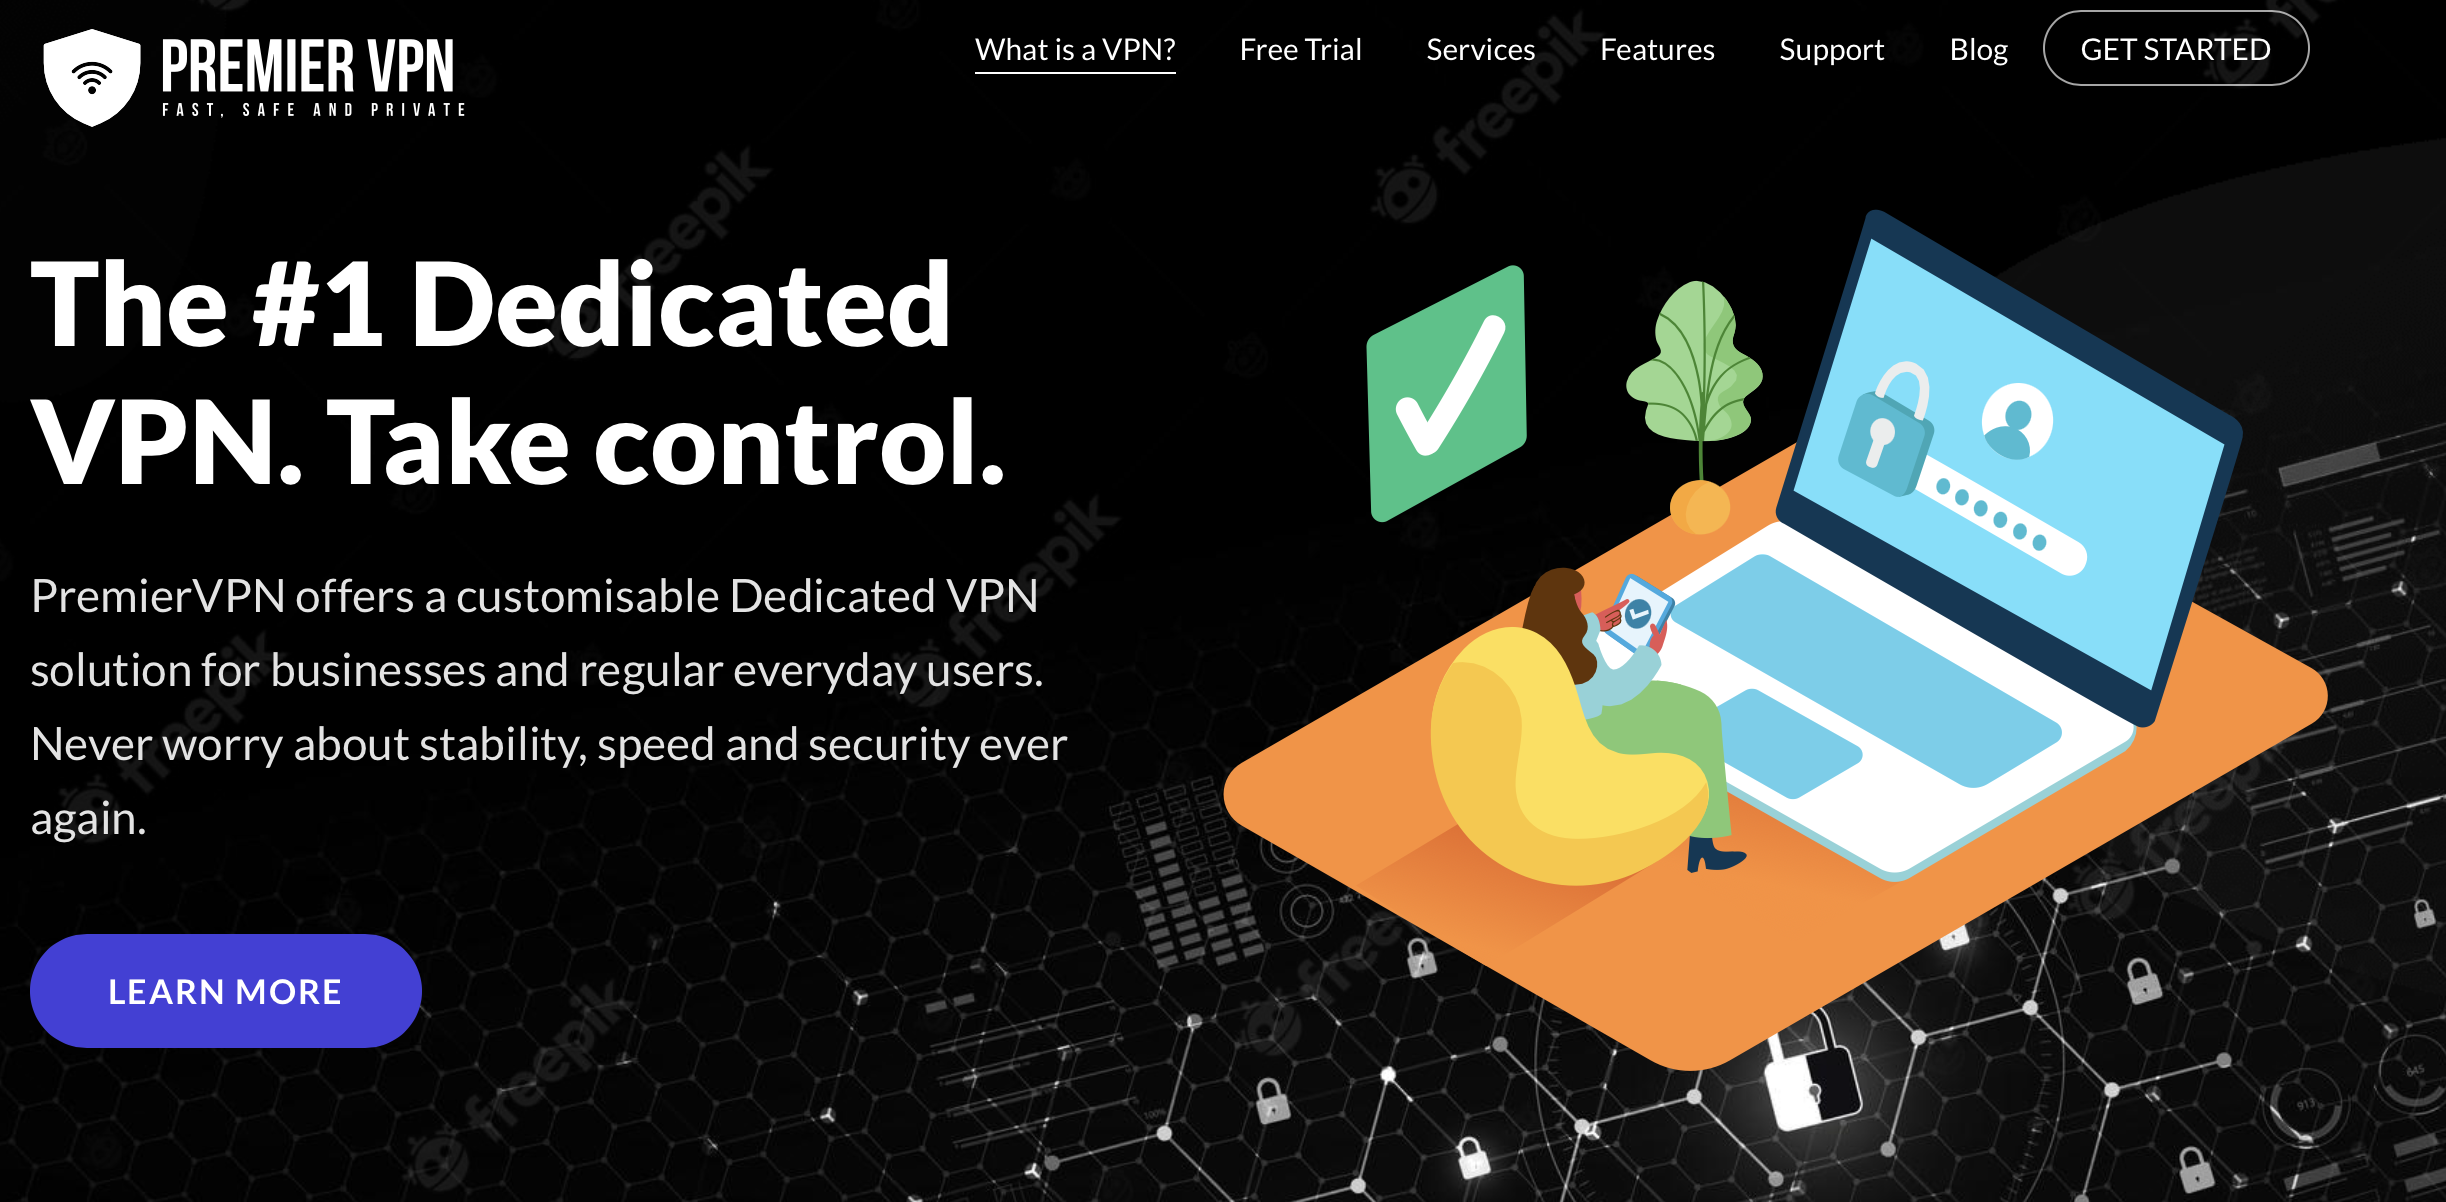 PremierVPN Launches Fully Dedicated VPN Service for Business and Individual Users, Providing Greater Control and Security